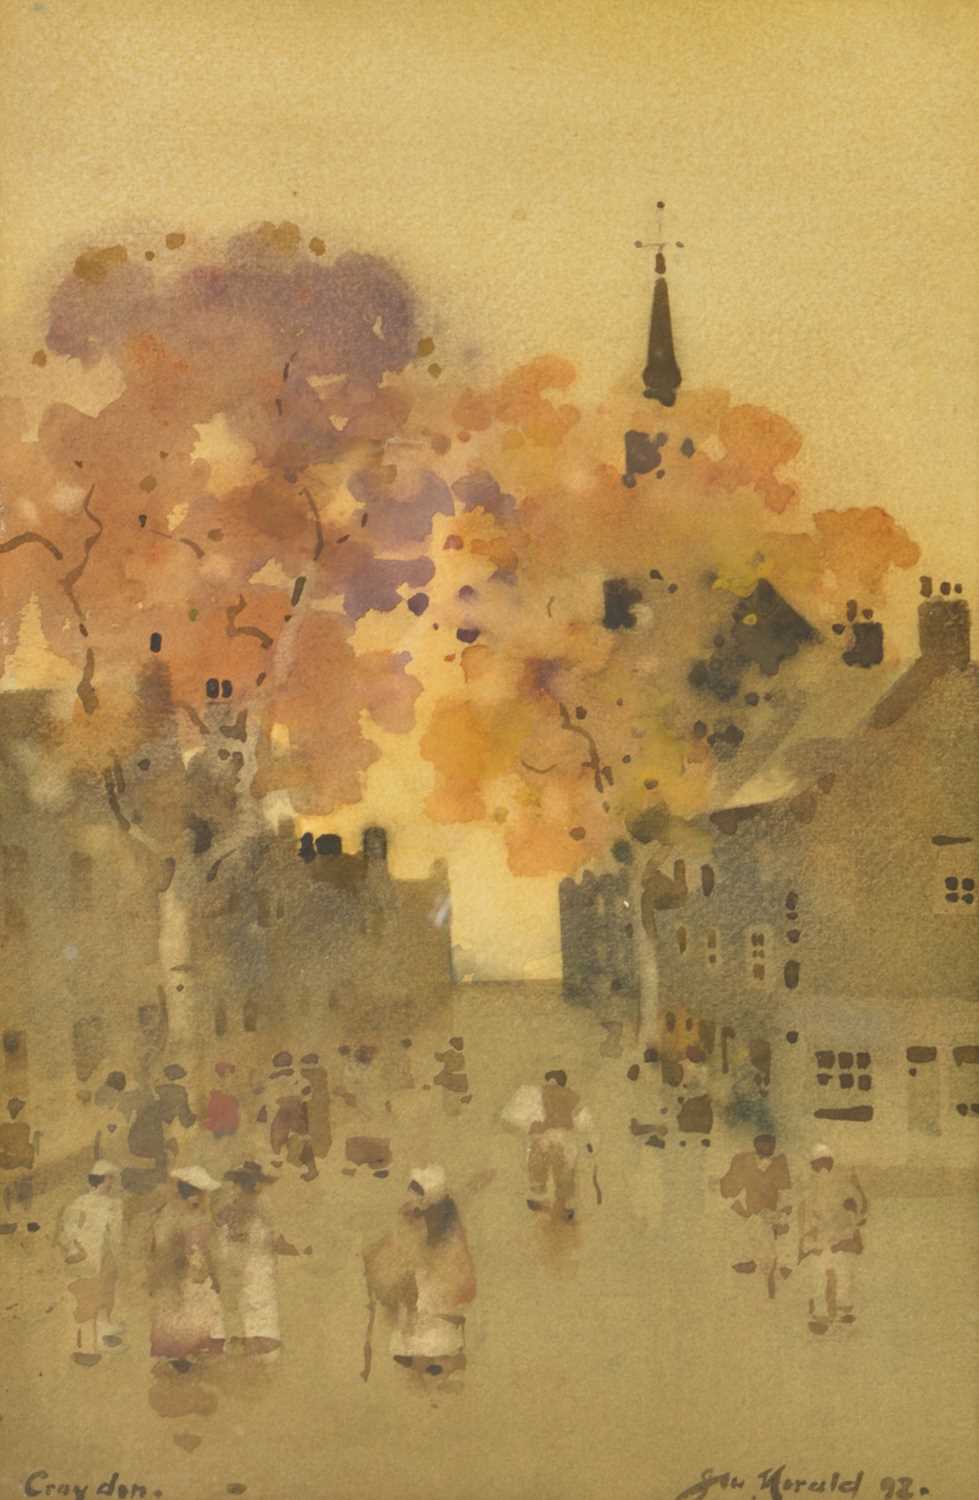 James Watterson Herald (1859-1914) Croyden watercolour, signed and dated '98 lower right, inscribed